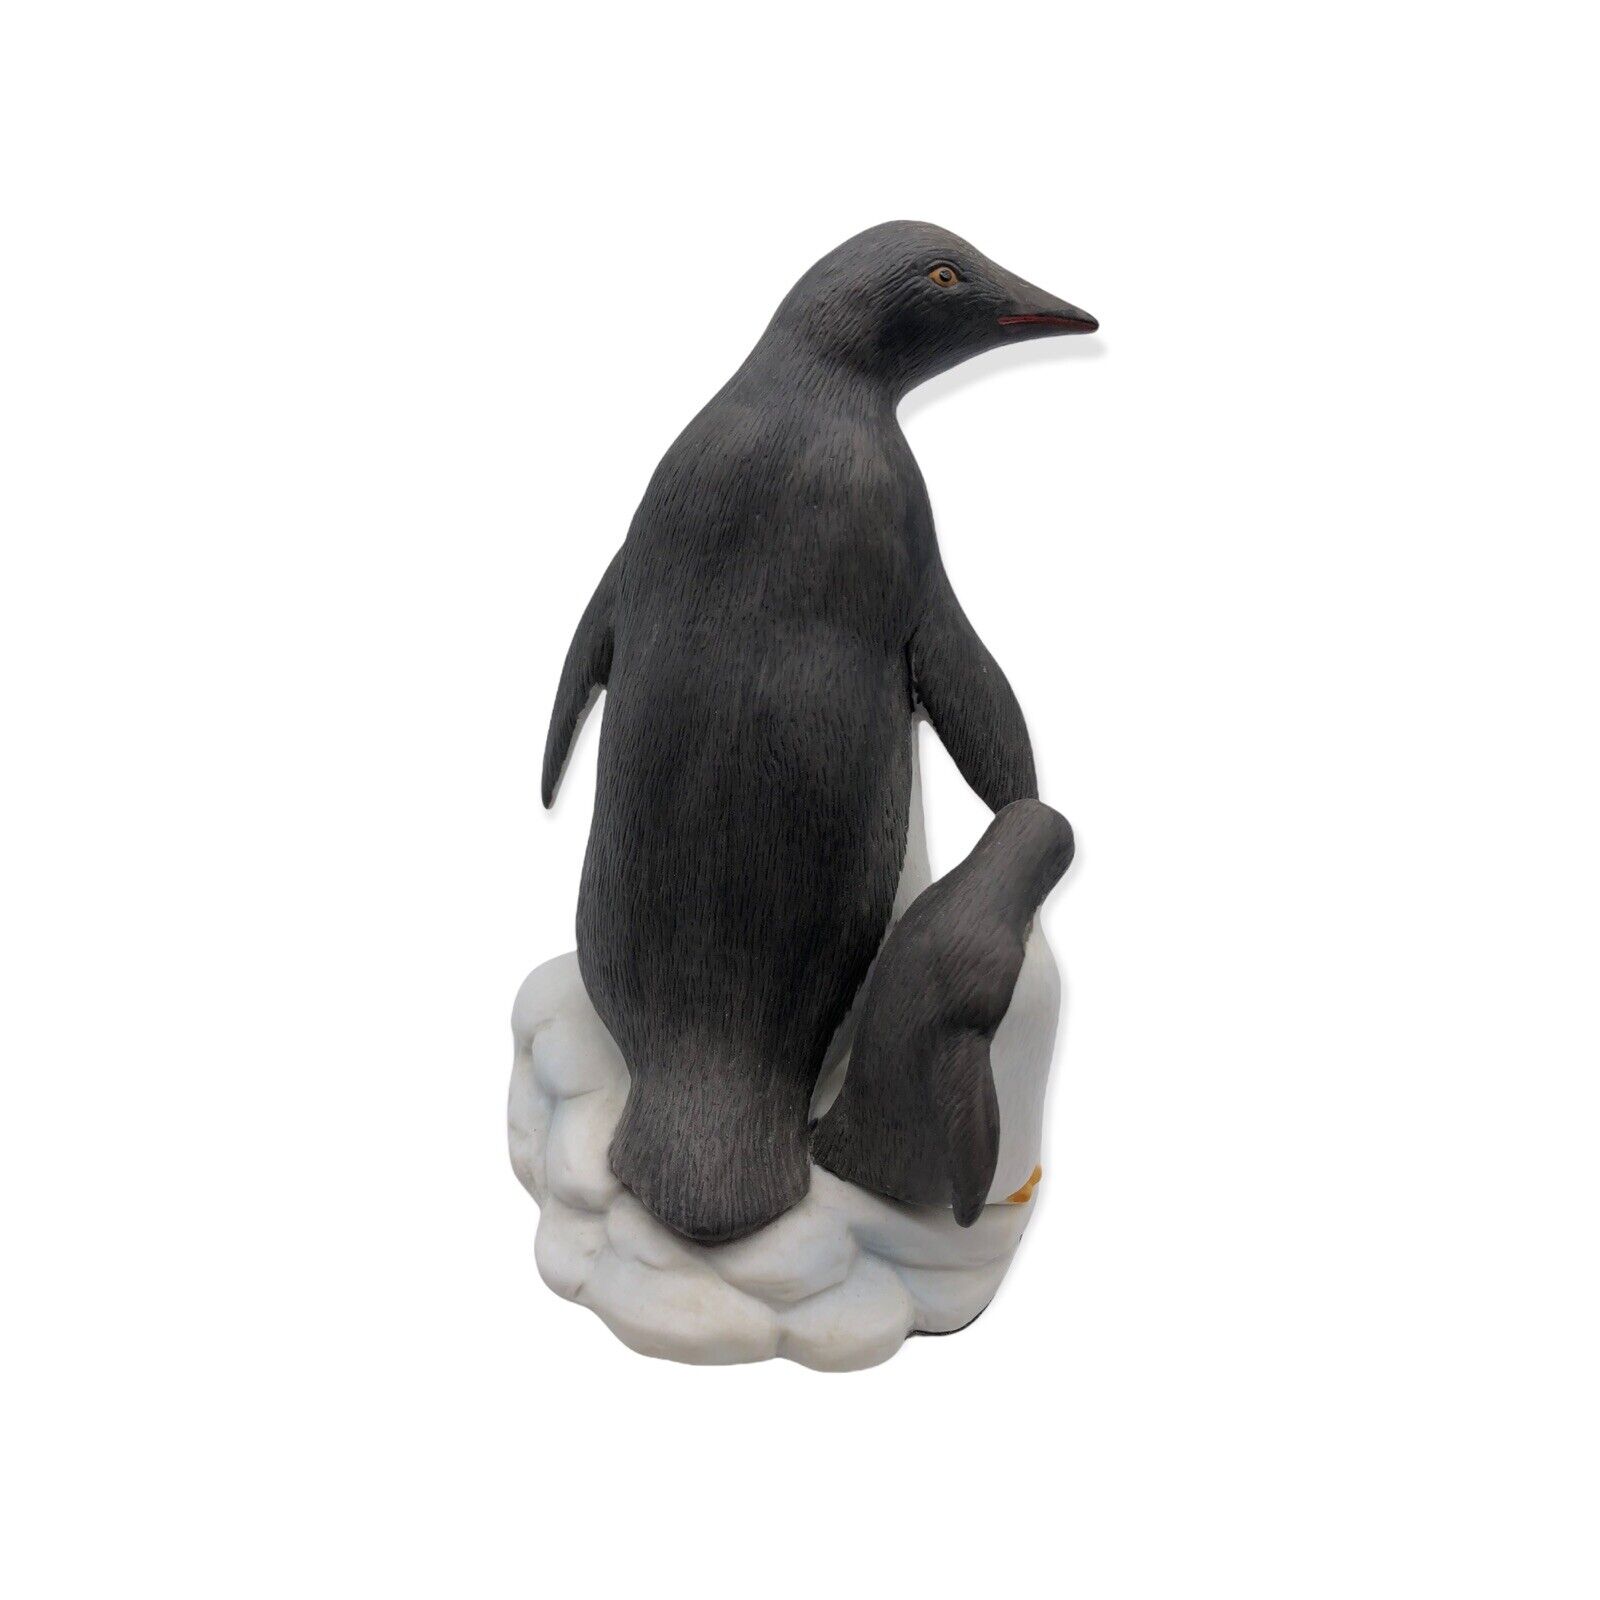 Fitz & Floyd Penguin Bookends Set Lot 2 Figurines Bisque Ceramic Weighted 7.5\